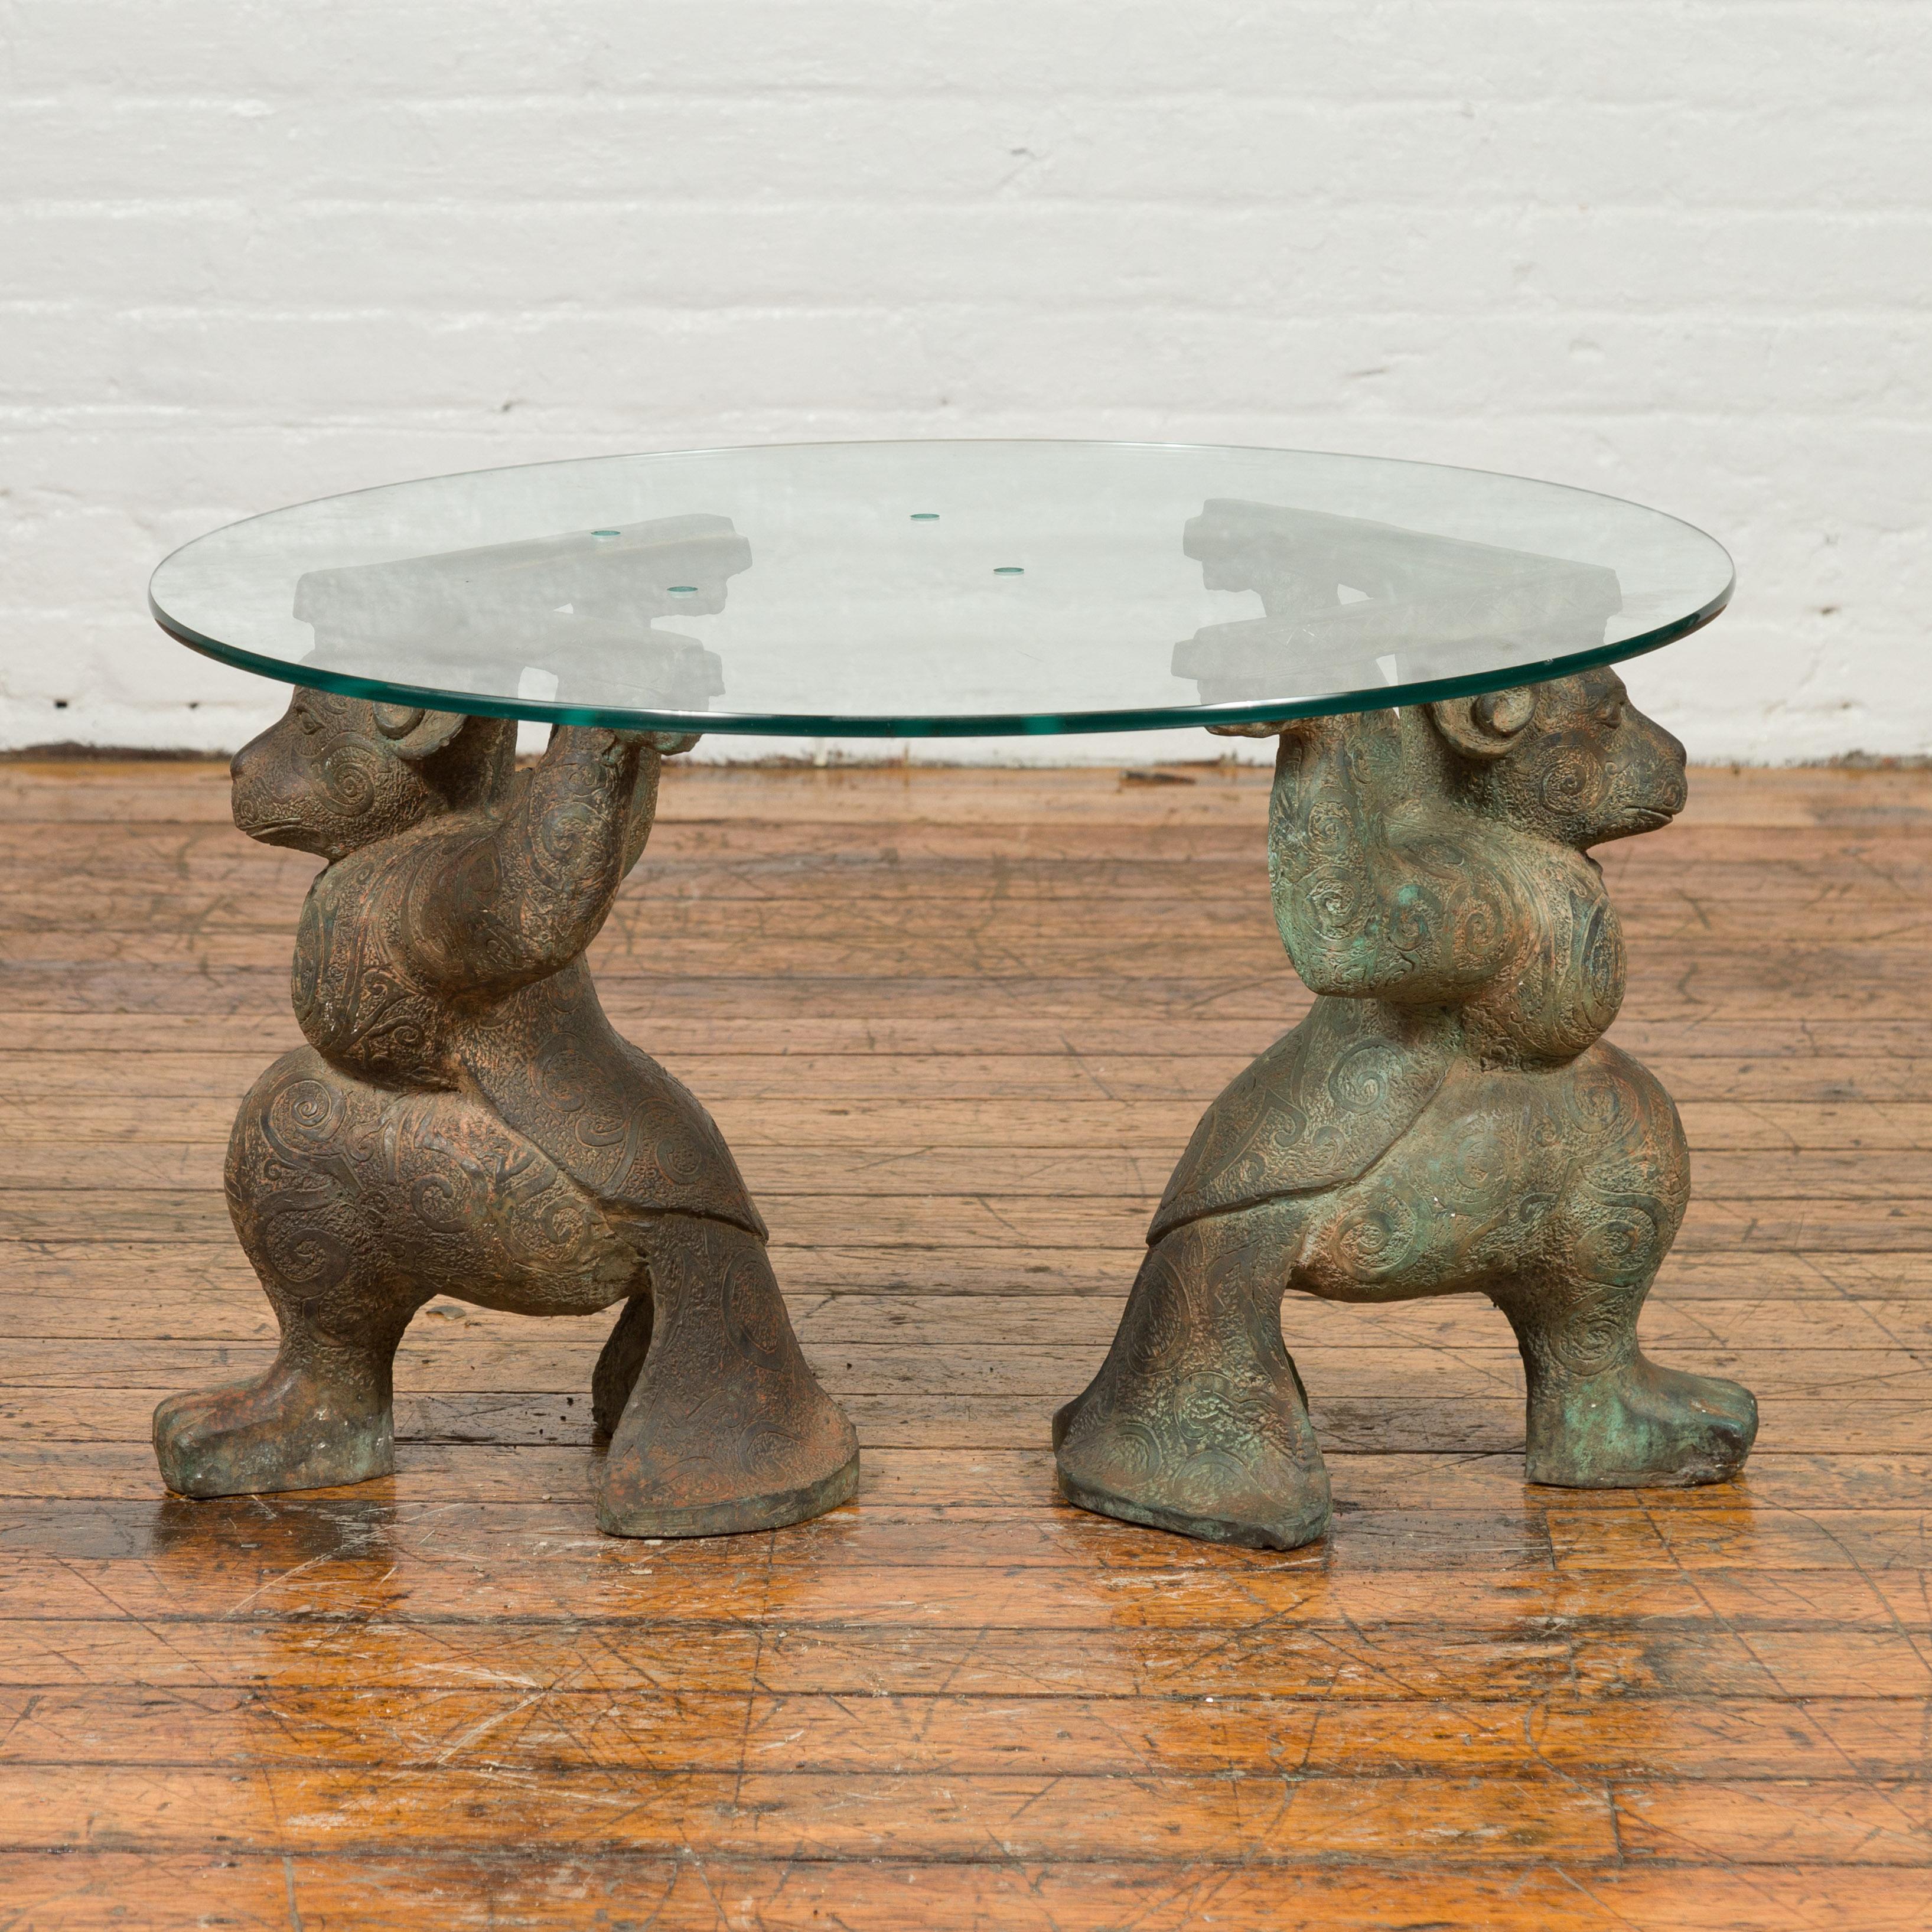 A vintage bronze double monkey coffee table base from the mid-20th century, with verde patina. The top is not included but shown on the photos to allow a better visualization of the possibilities. Created with the traditional technique of the